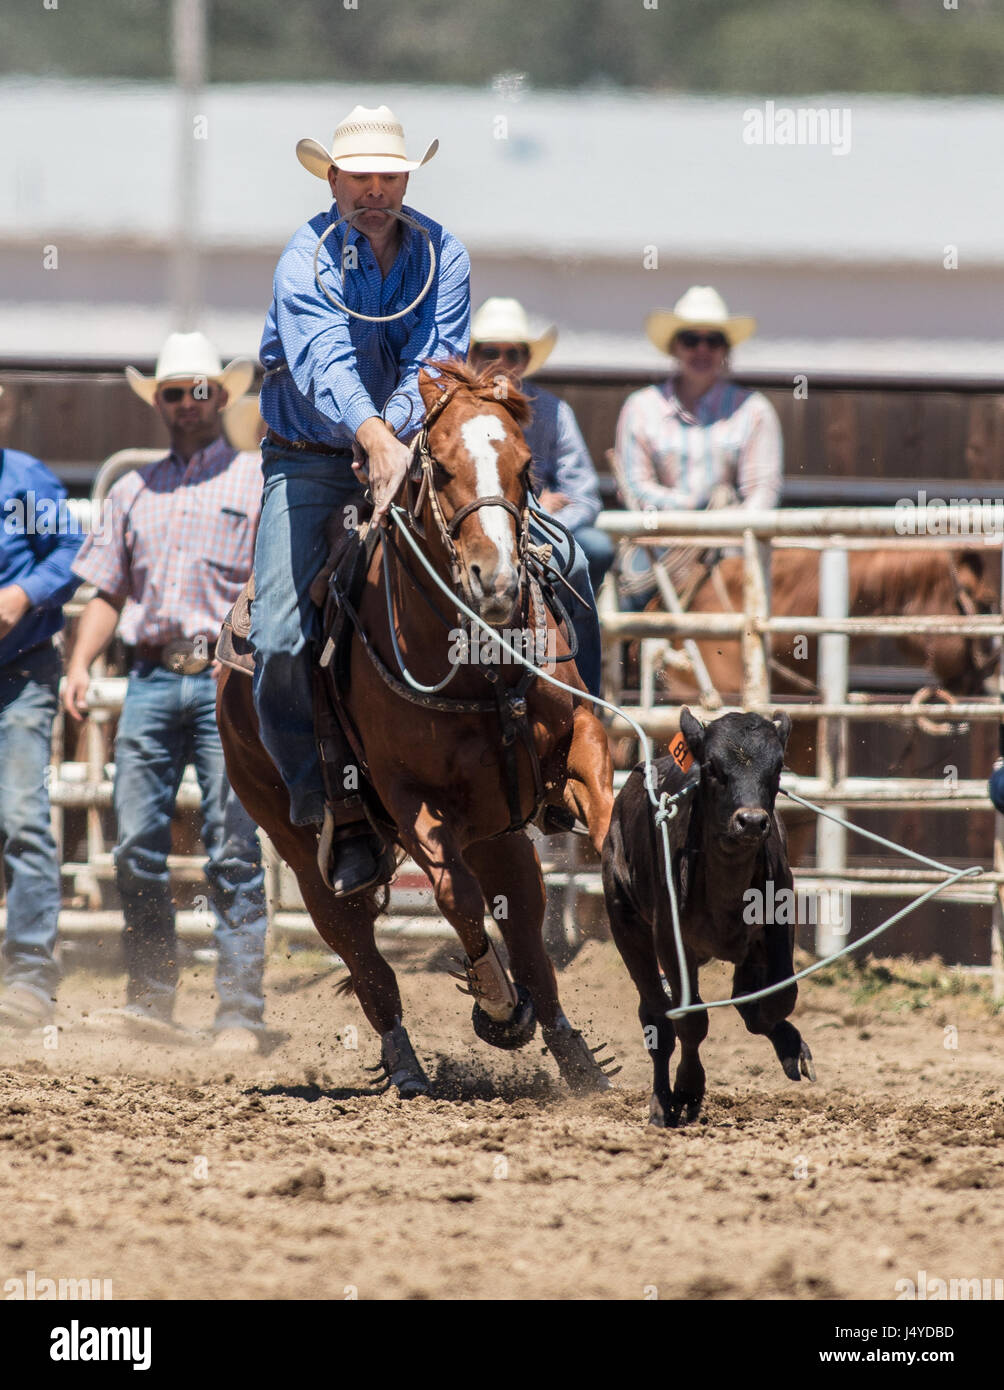 Calf roping action at the Cottonwood Rodeo in California. Stock Photo